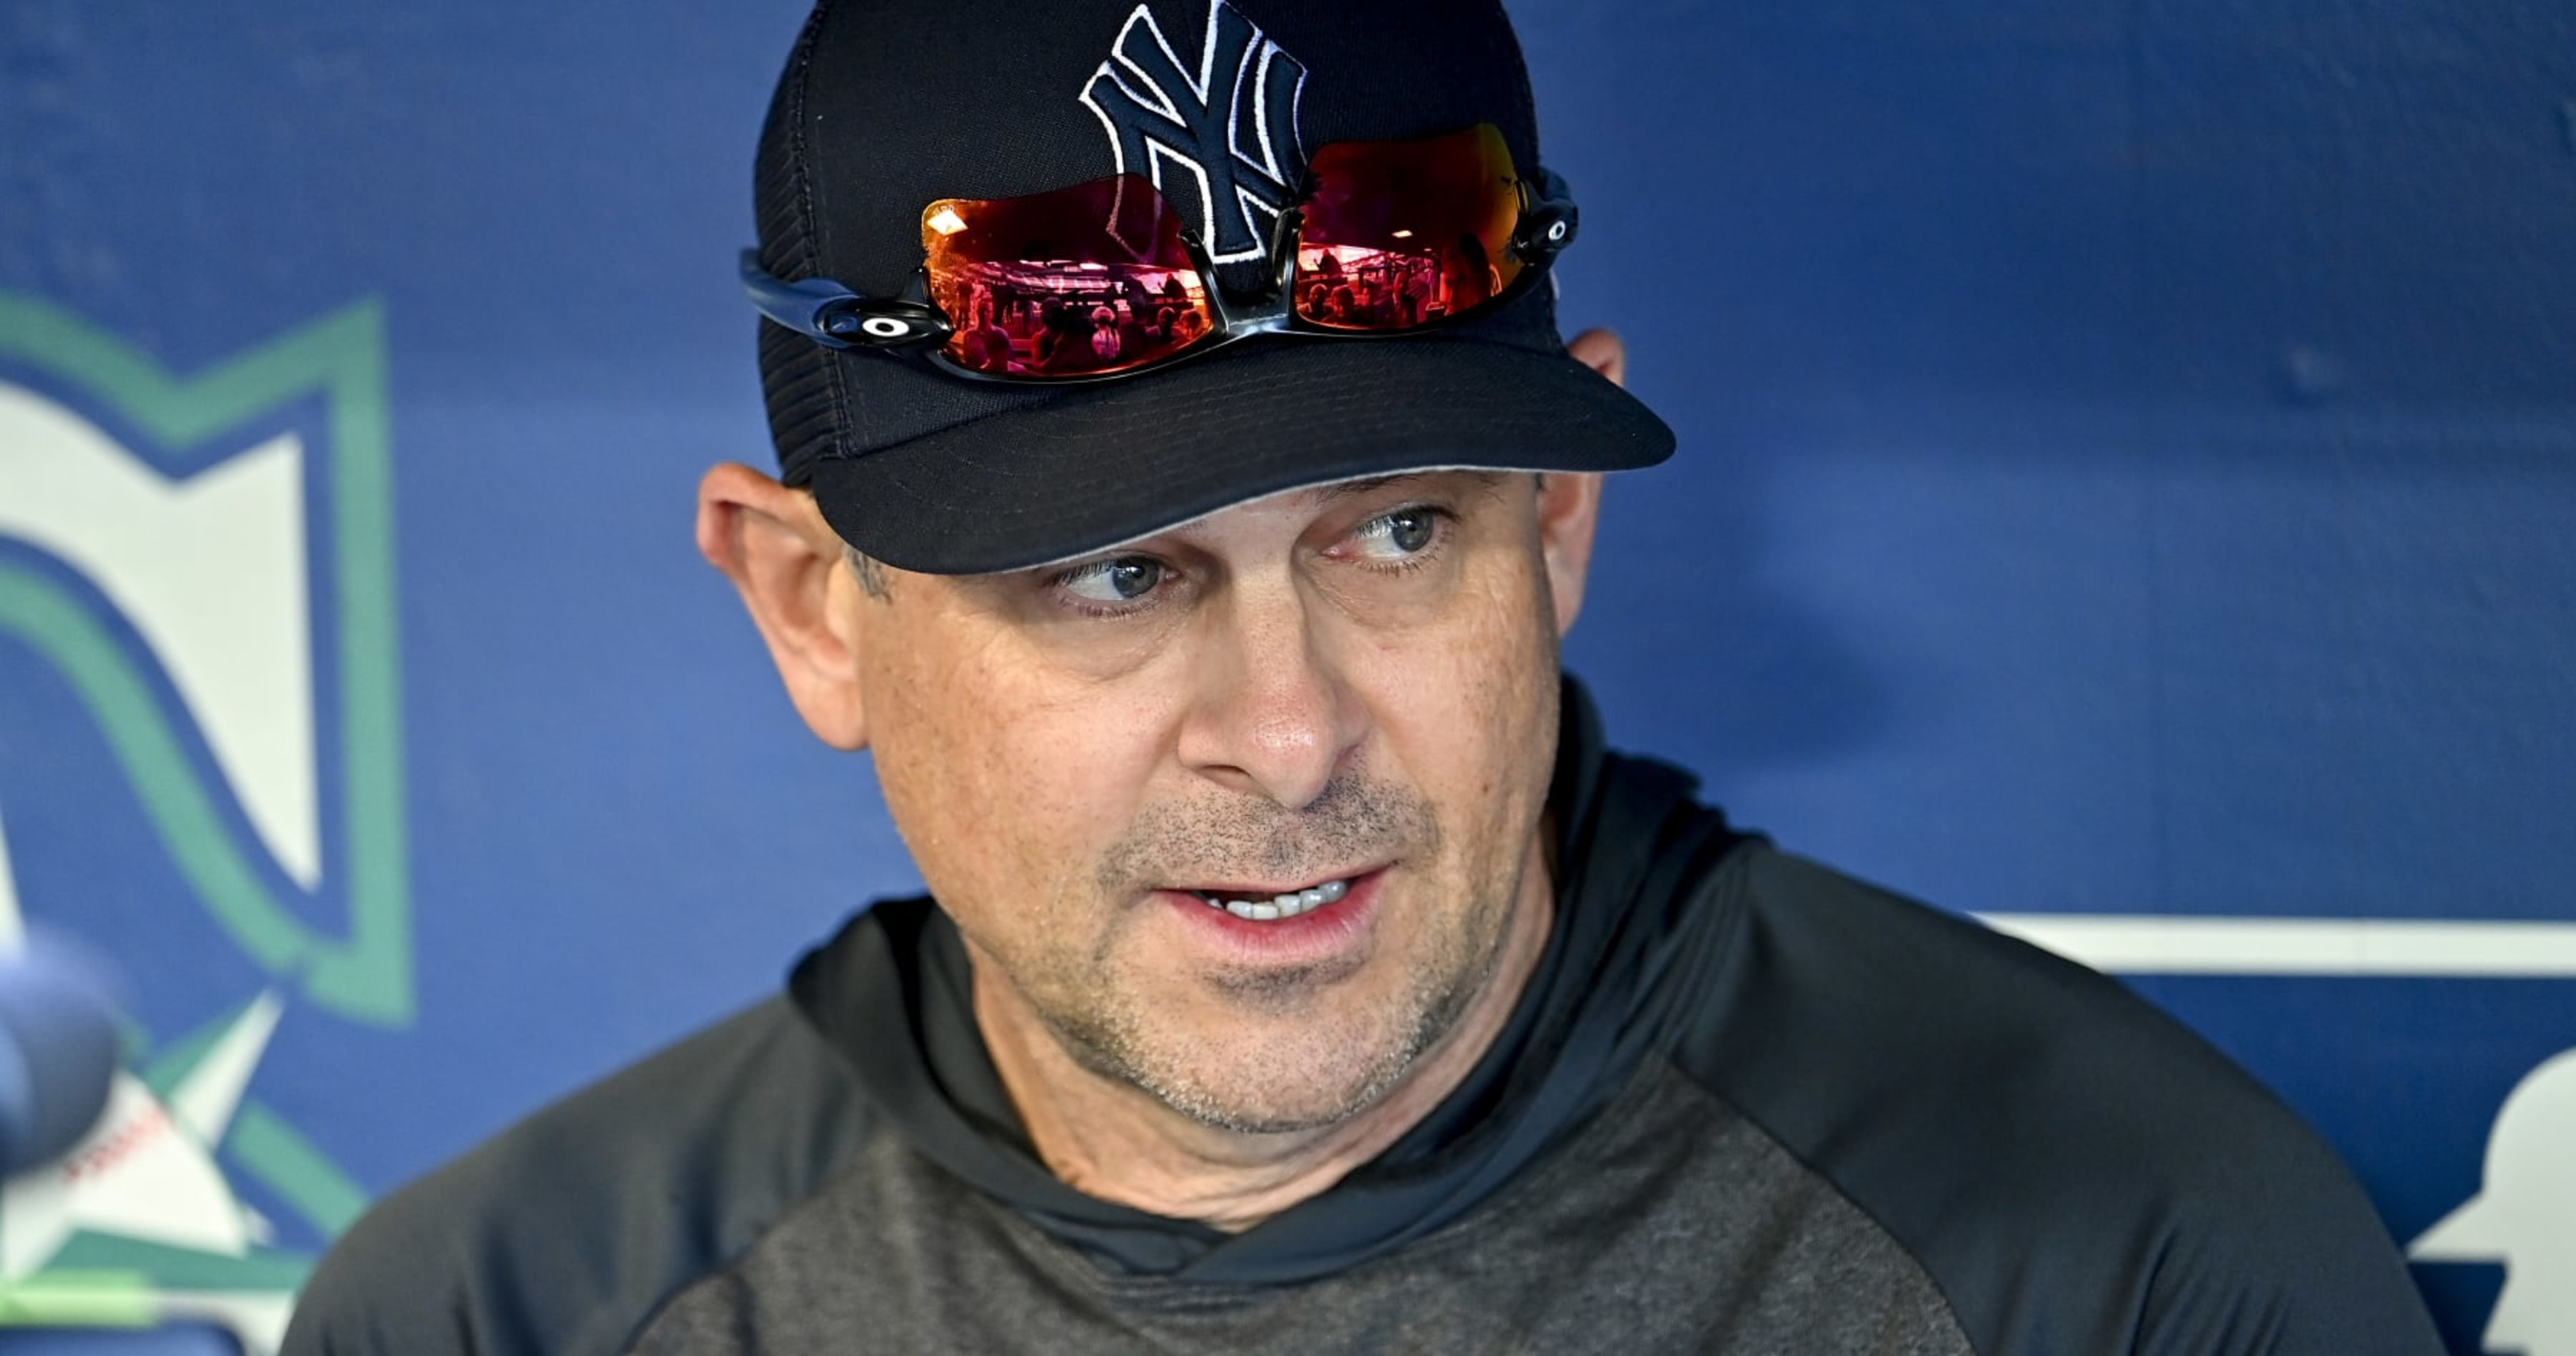 Yankees' Aaron Boone rips 'BS' narrative that he's analytics puppet 